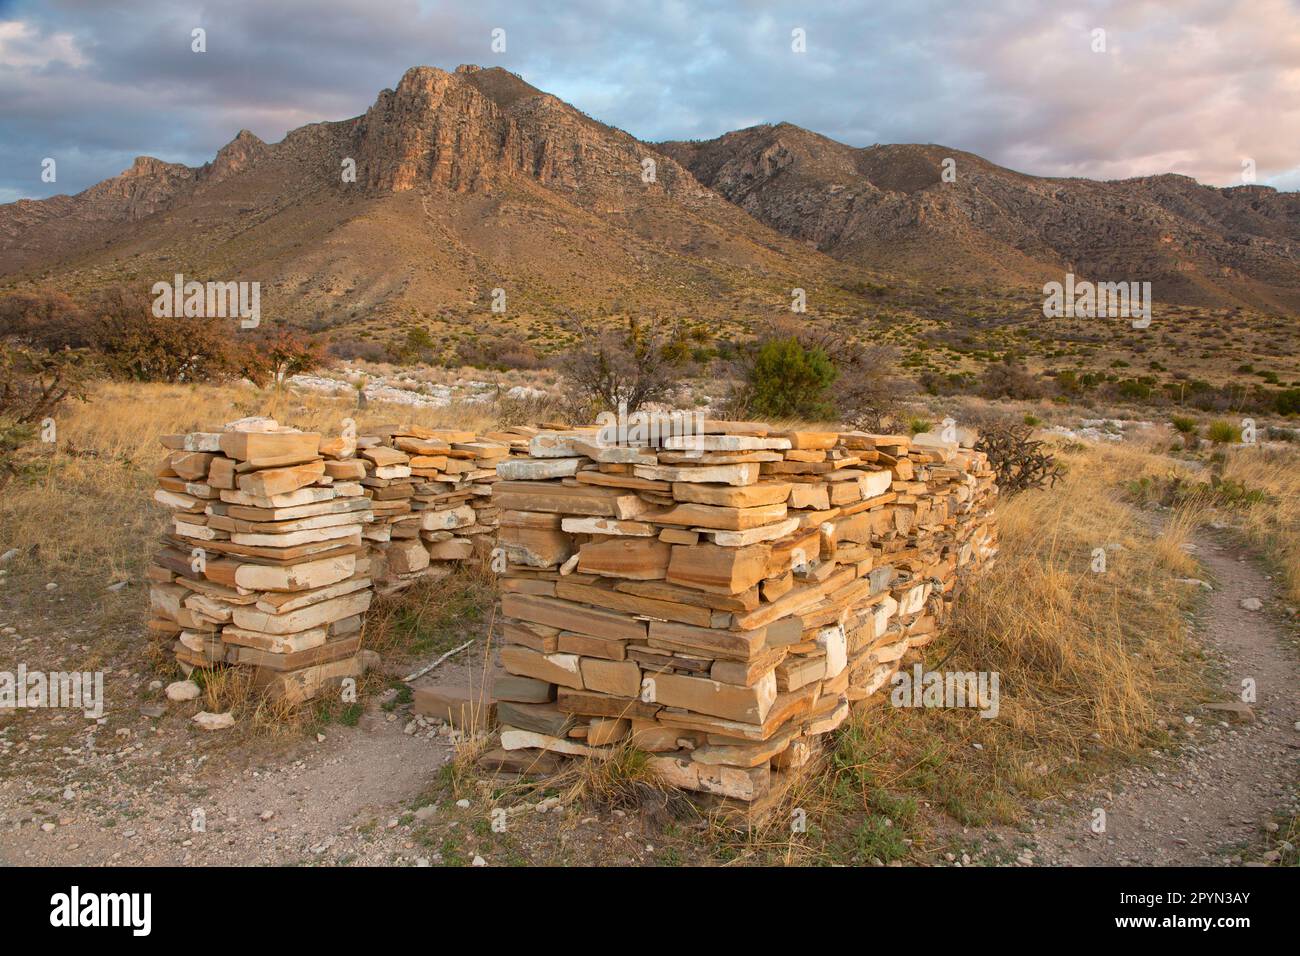 Butterfield Stage Station Ruins, Guadalupe Mountains National Park, Texas Stock Photo